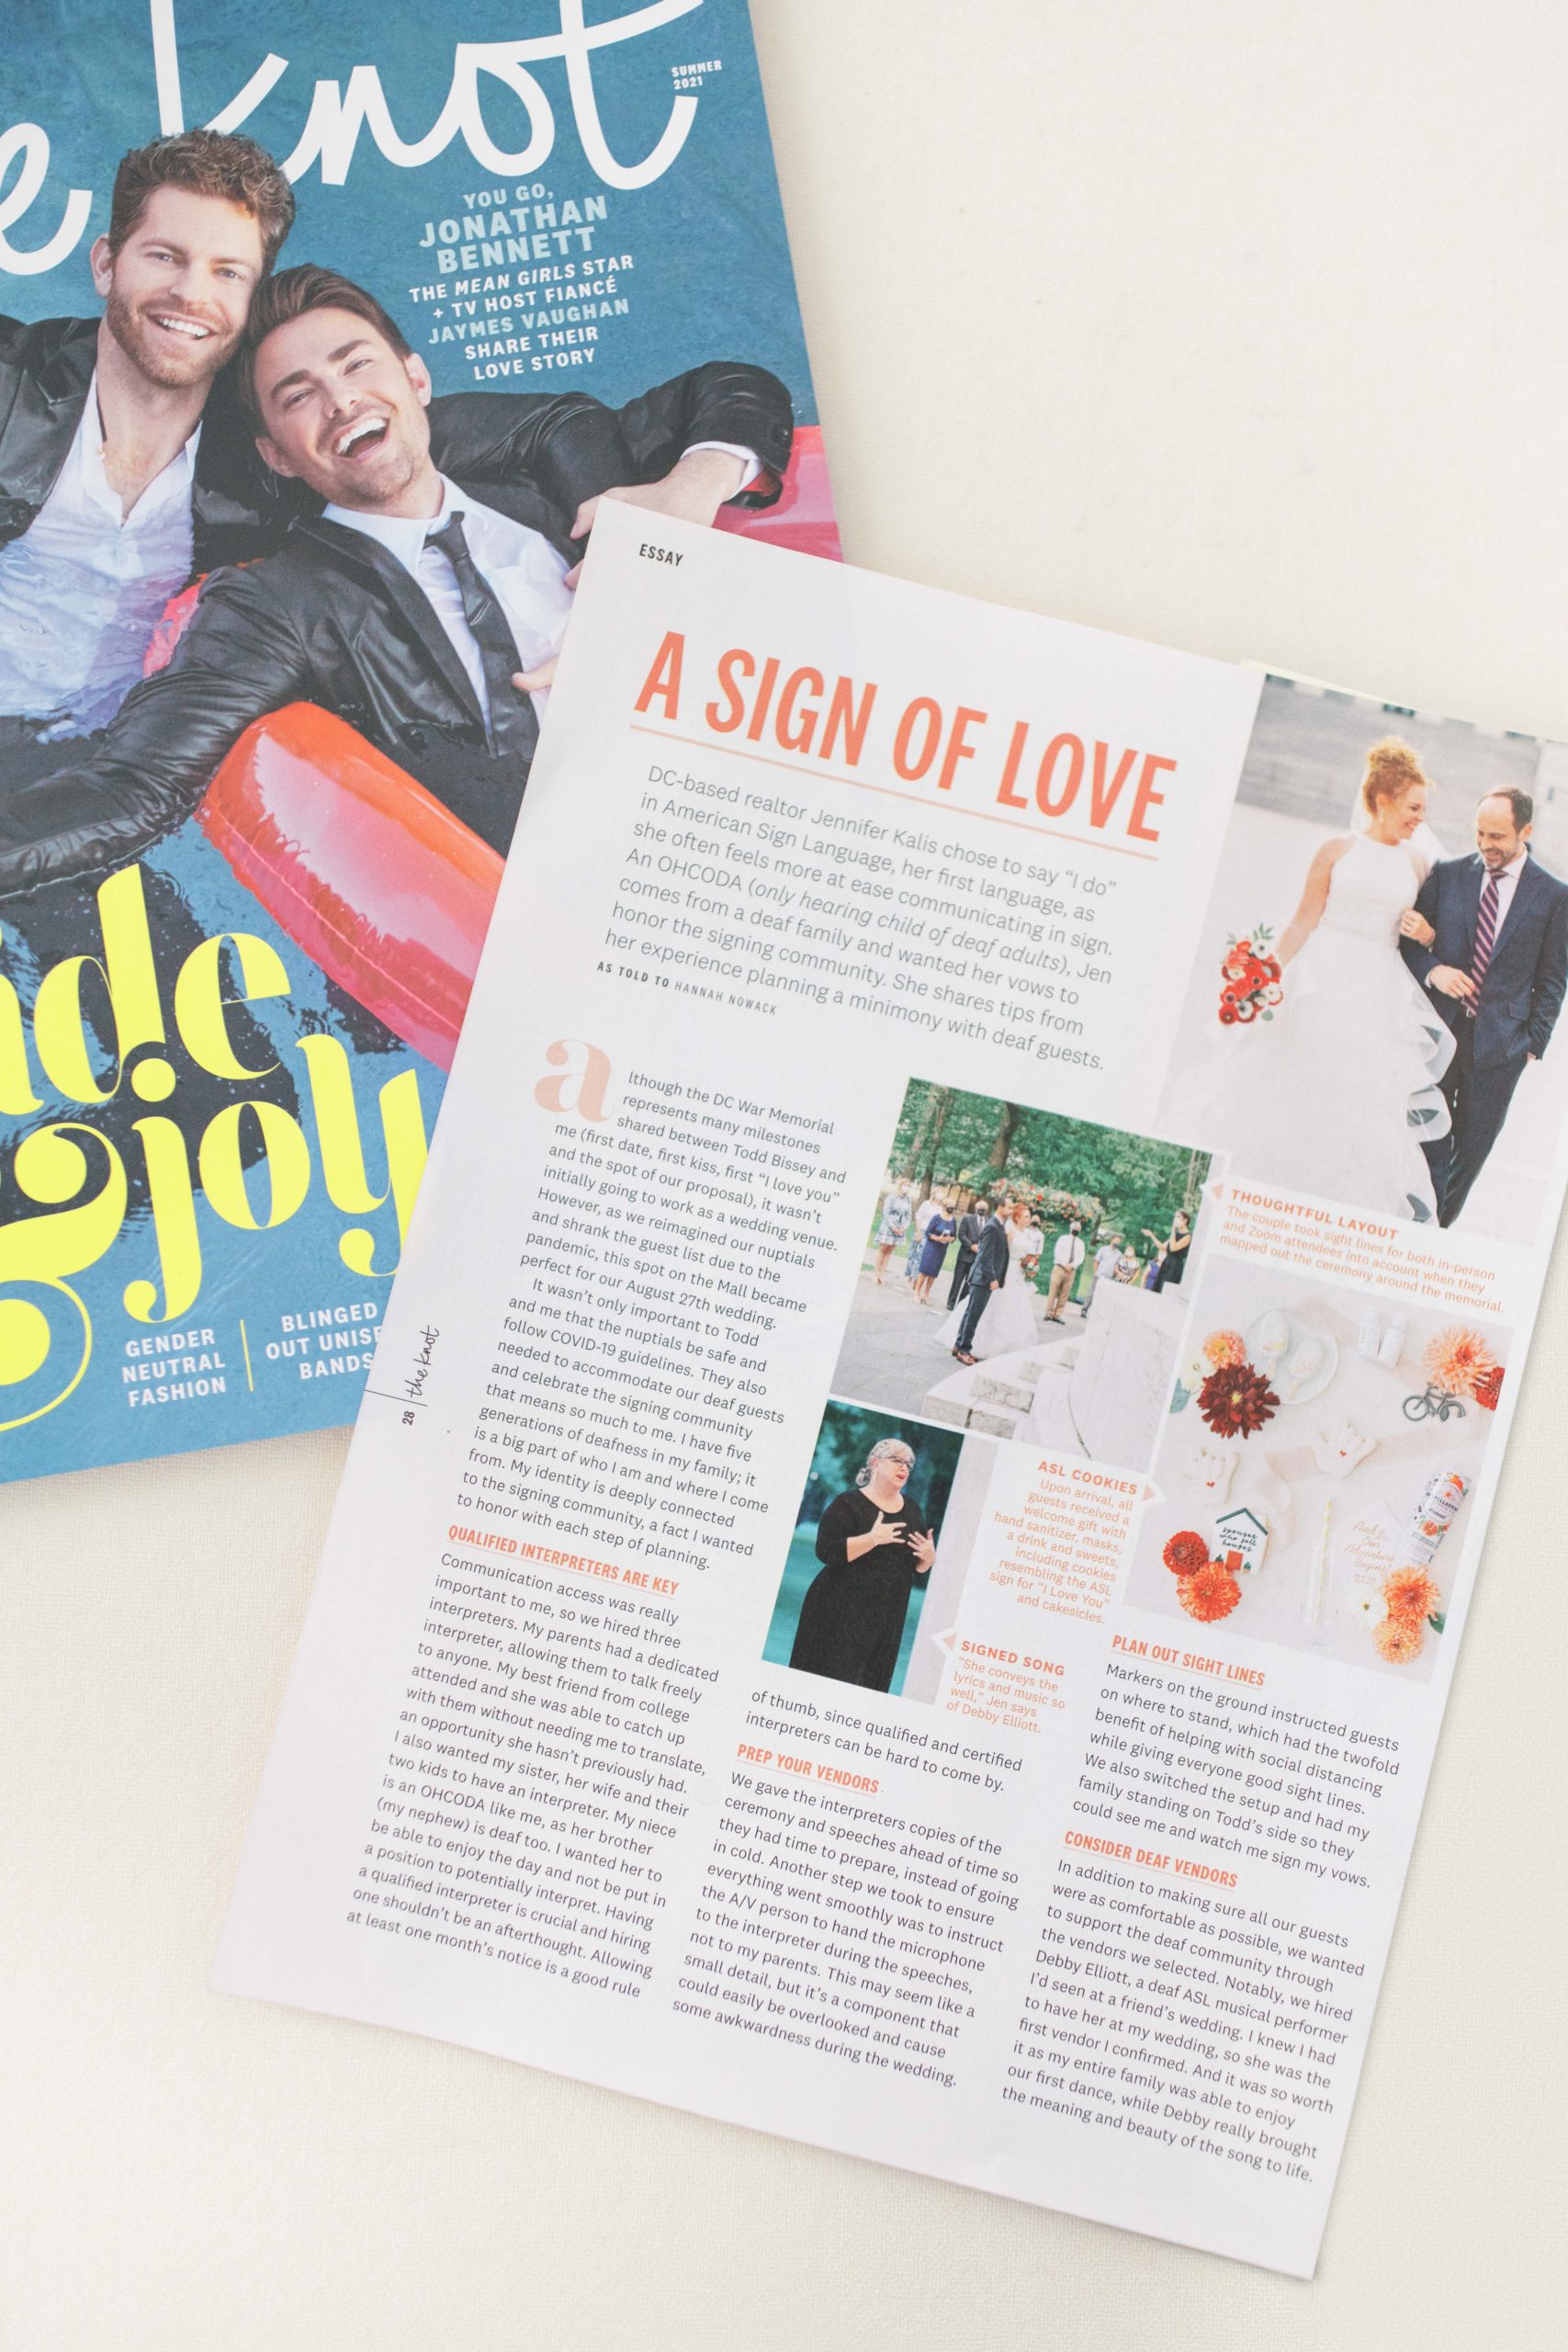 DC War Memorial Wedding Featured in The Knot Magazine